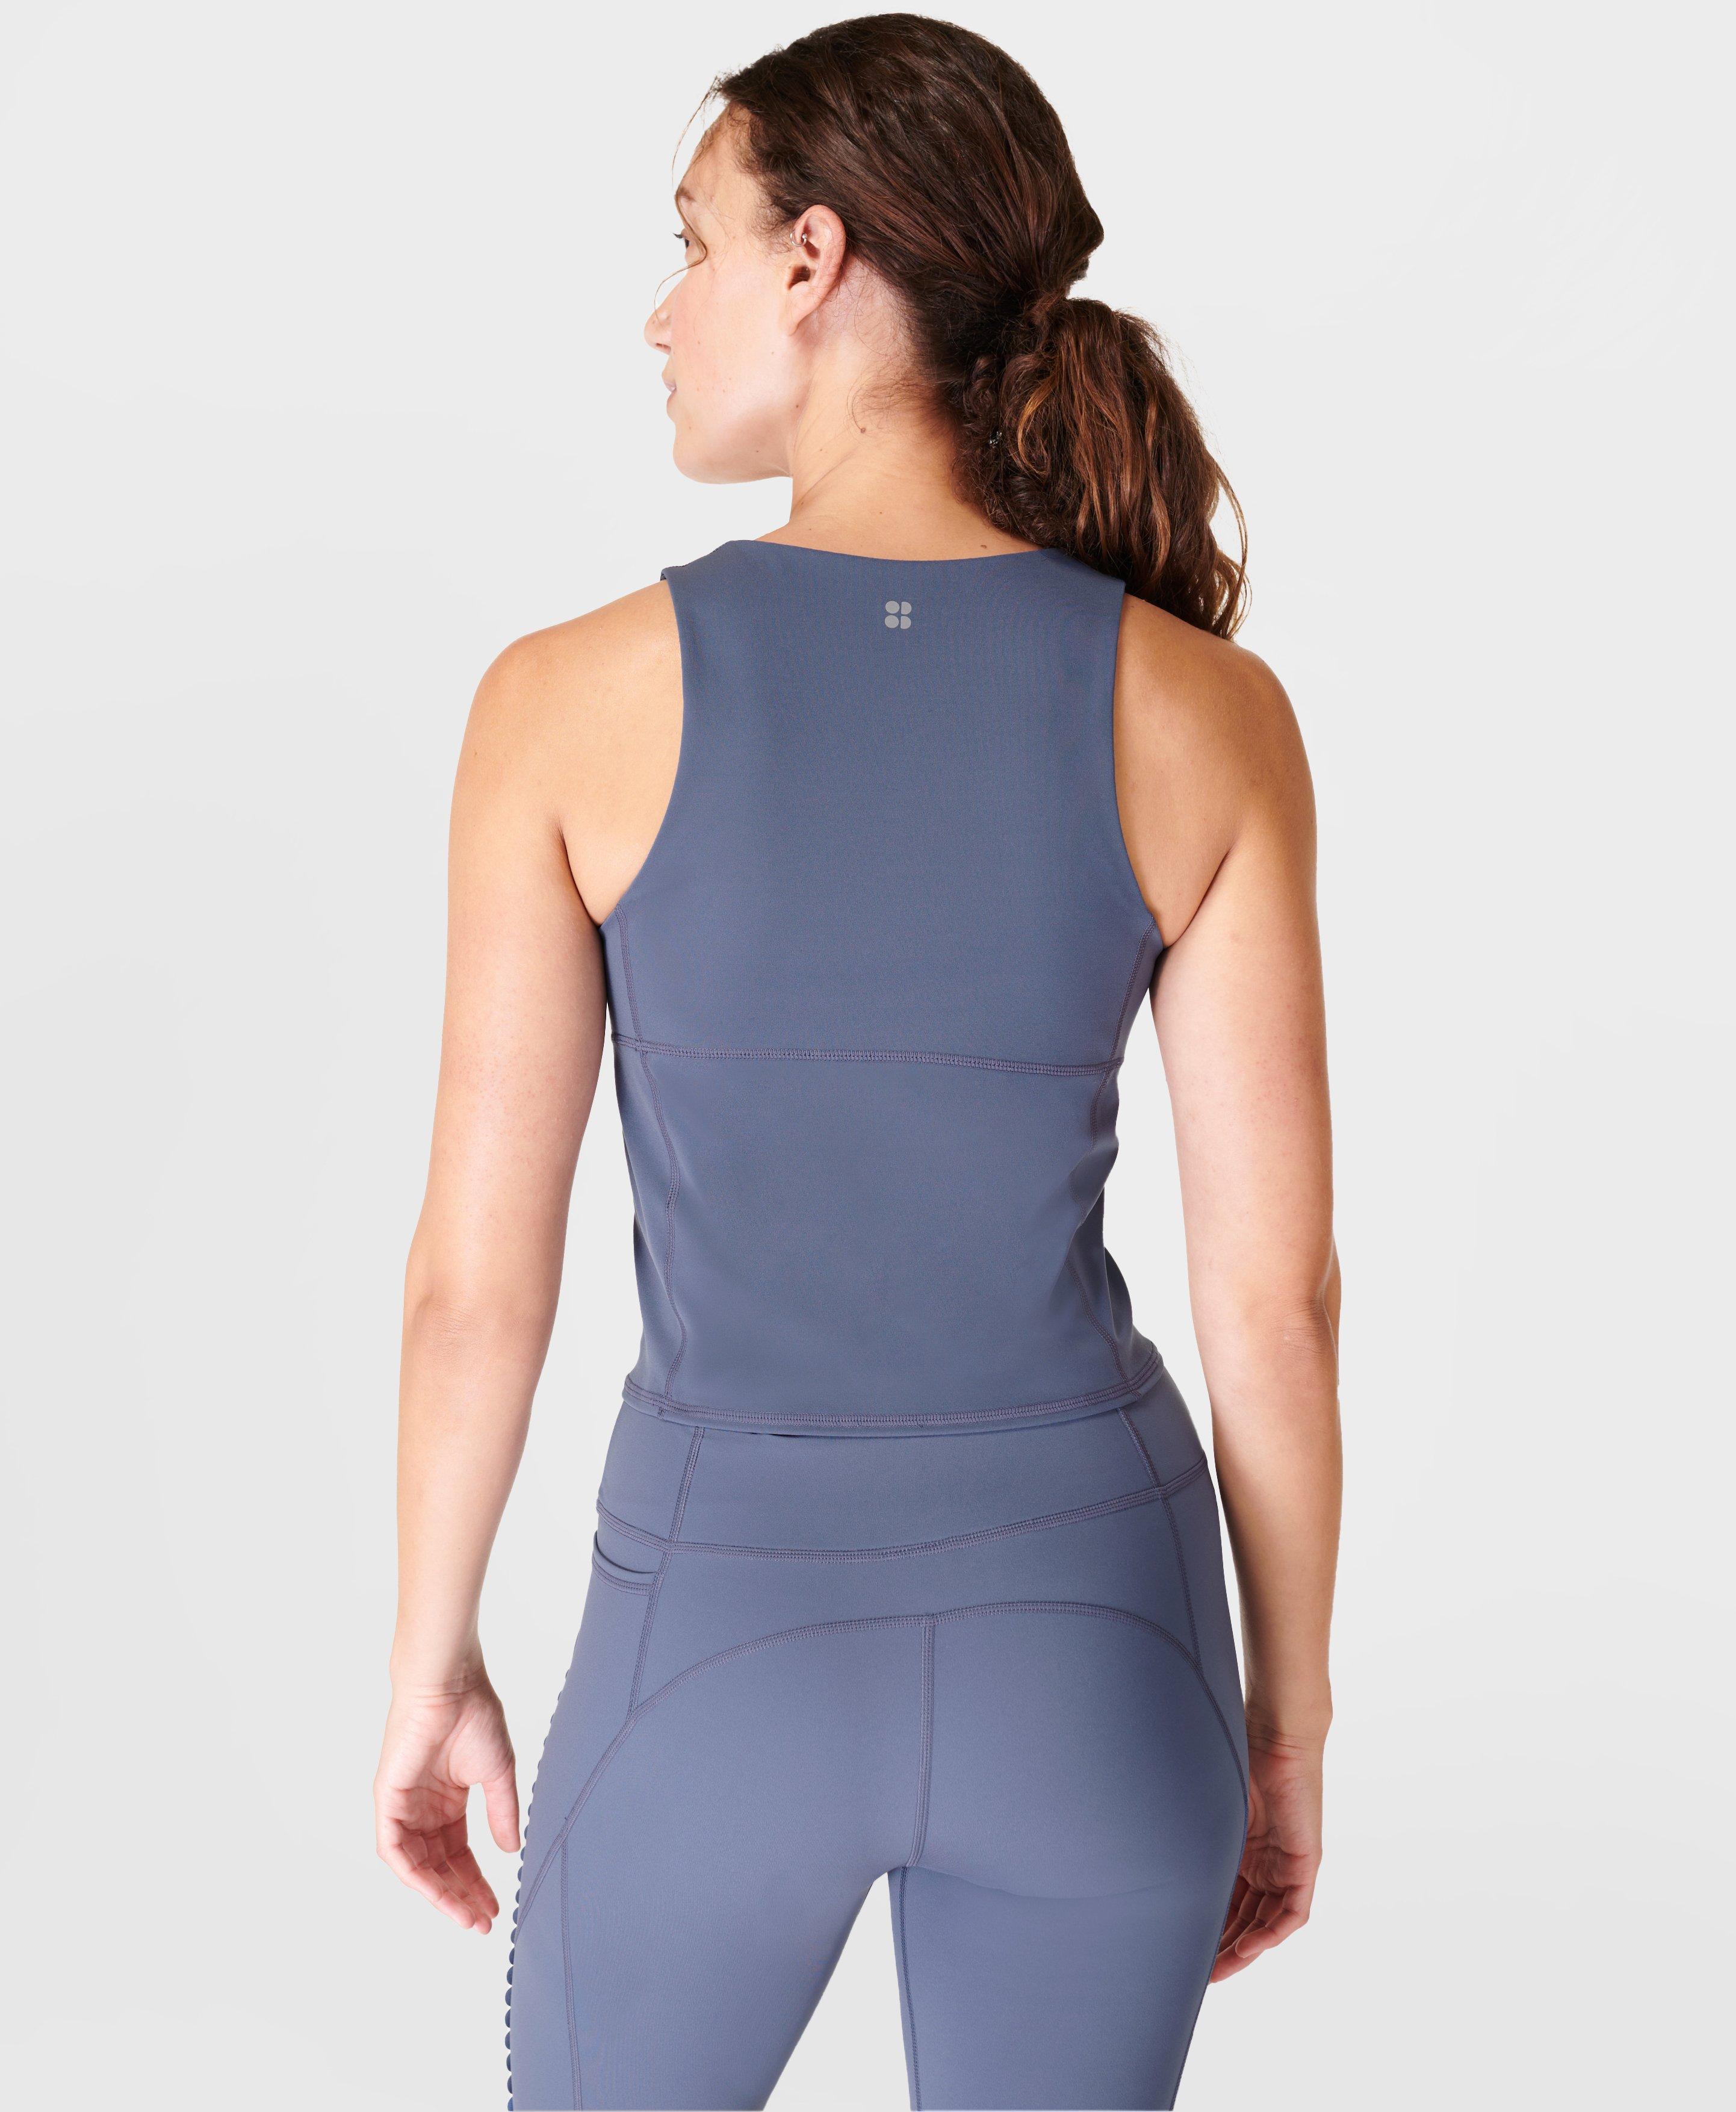 HeyNuts Workout Tank Blue - $16 (46% Off Retail) - From Blair